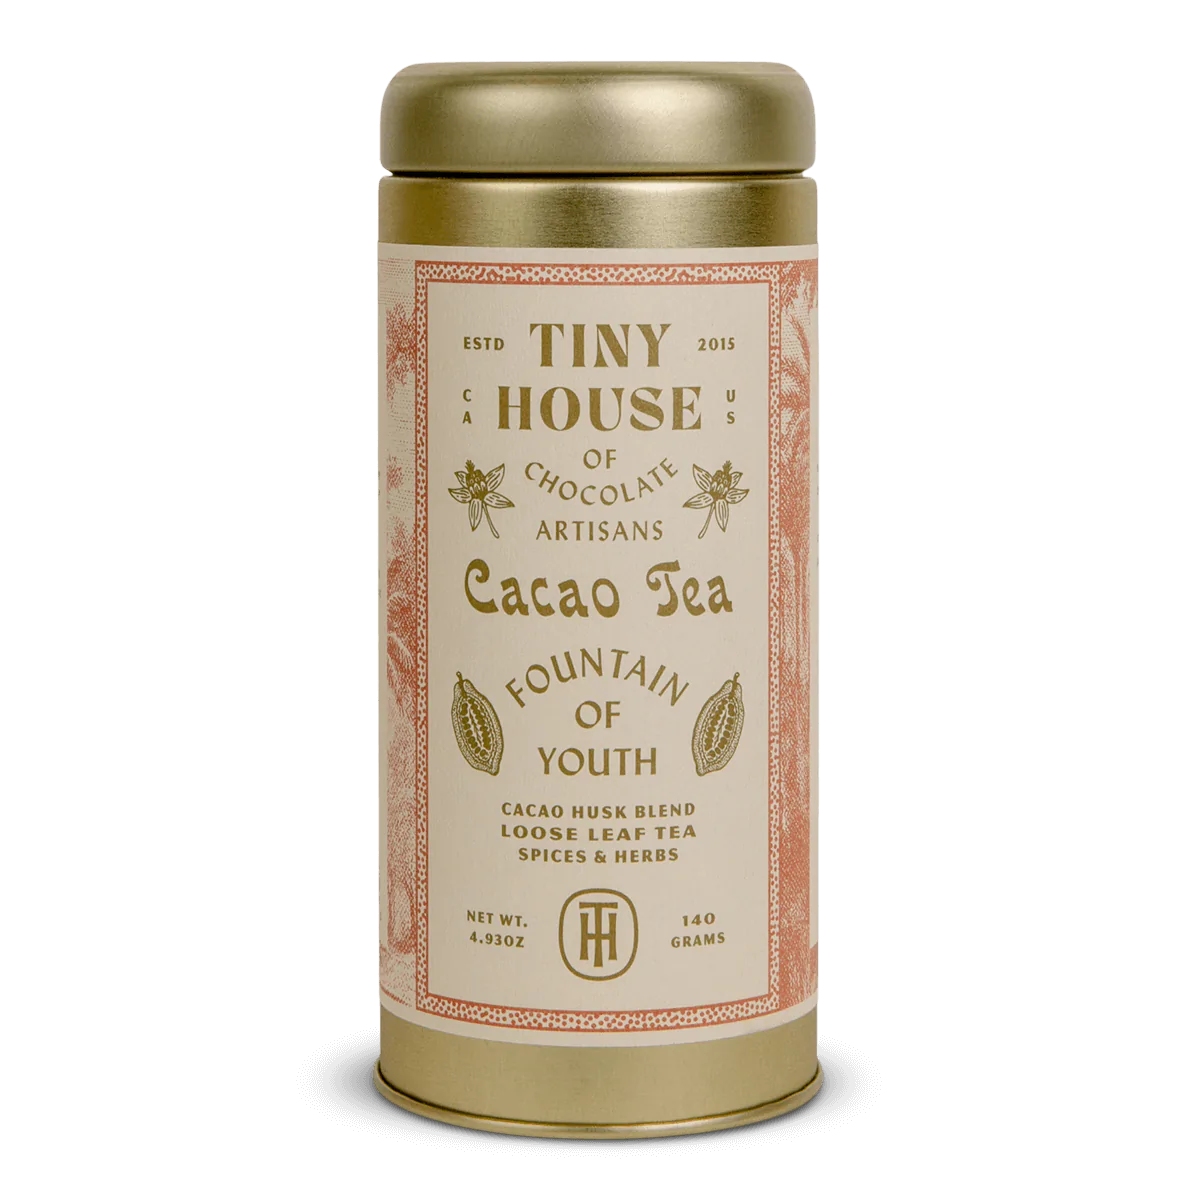 Fountain of Youth Cacao Tea